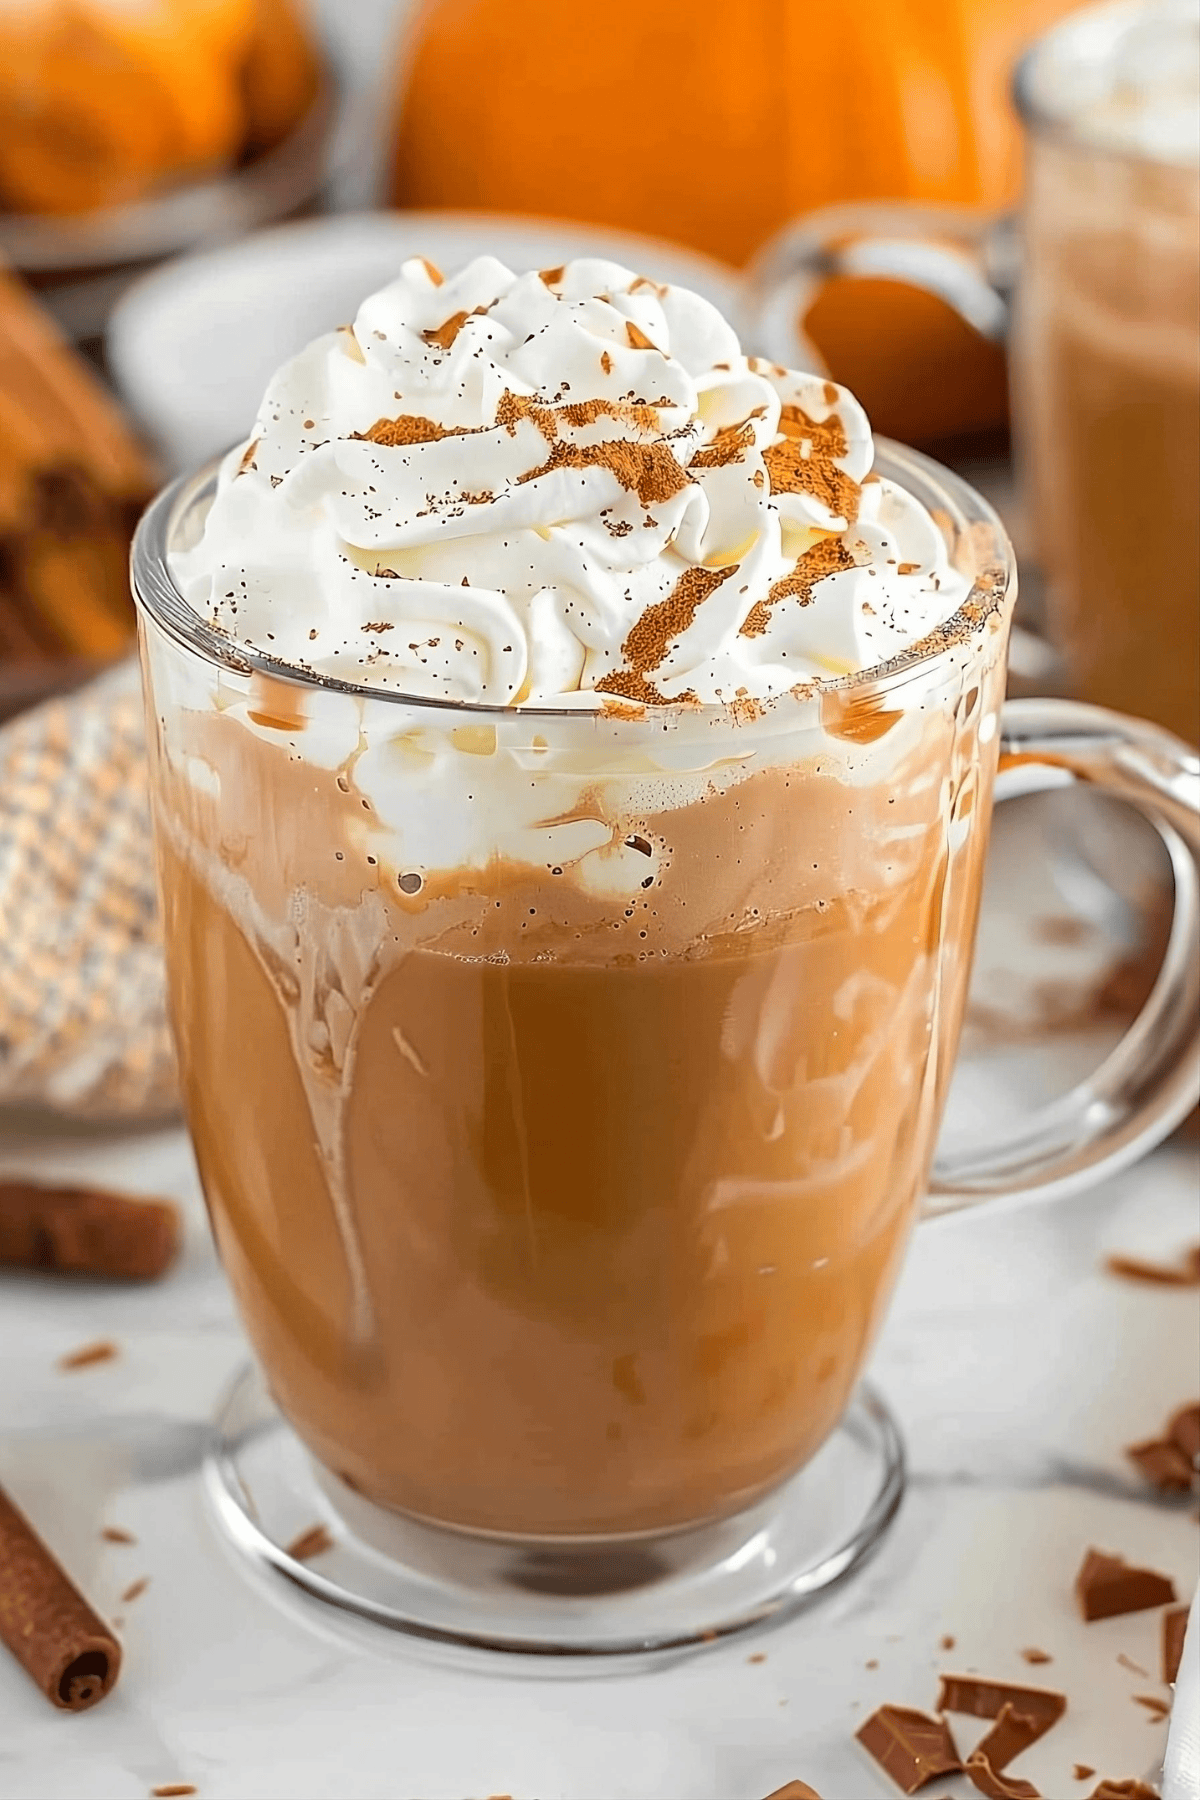 Pumpkin spice hot chocolate in a glass mug whit whipped cream and spices on top.